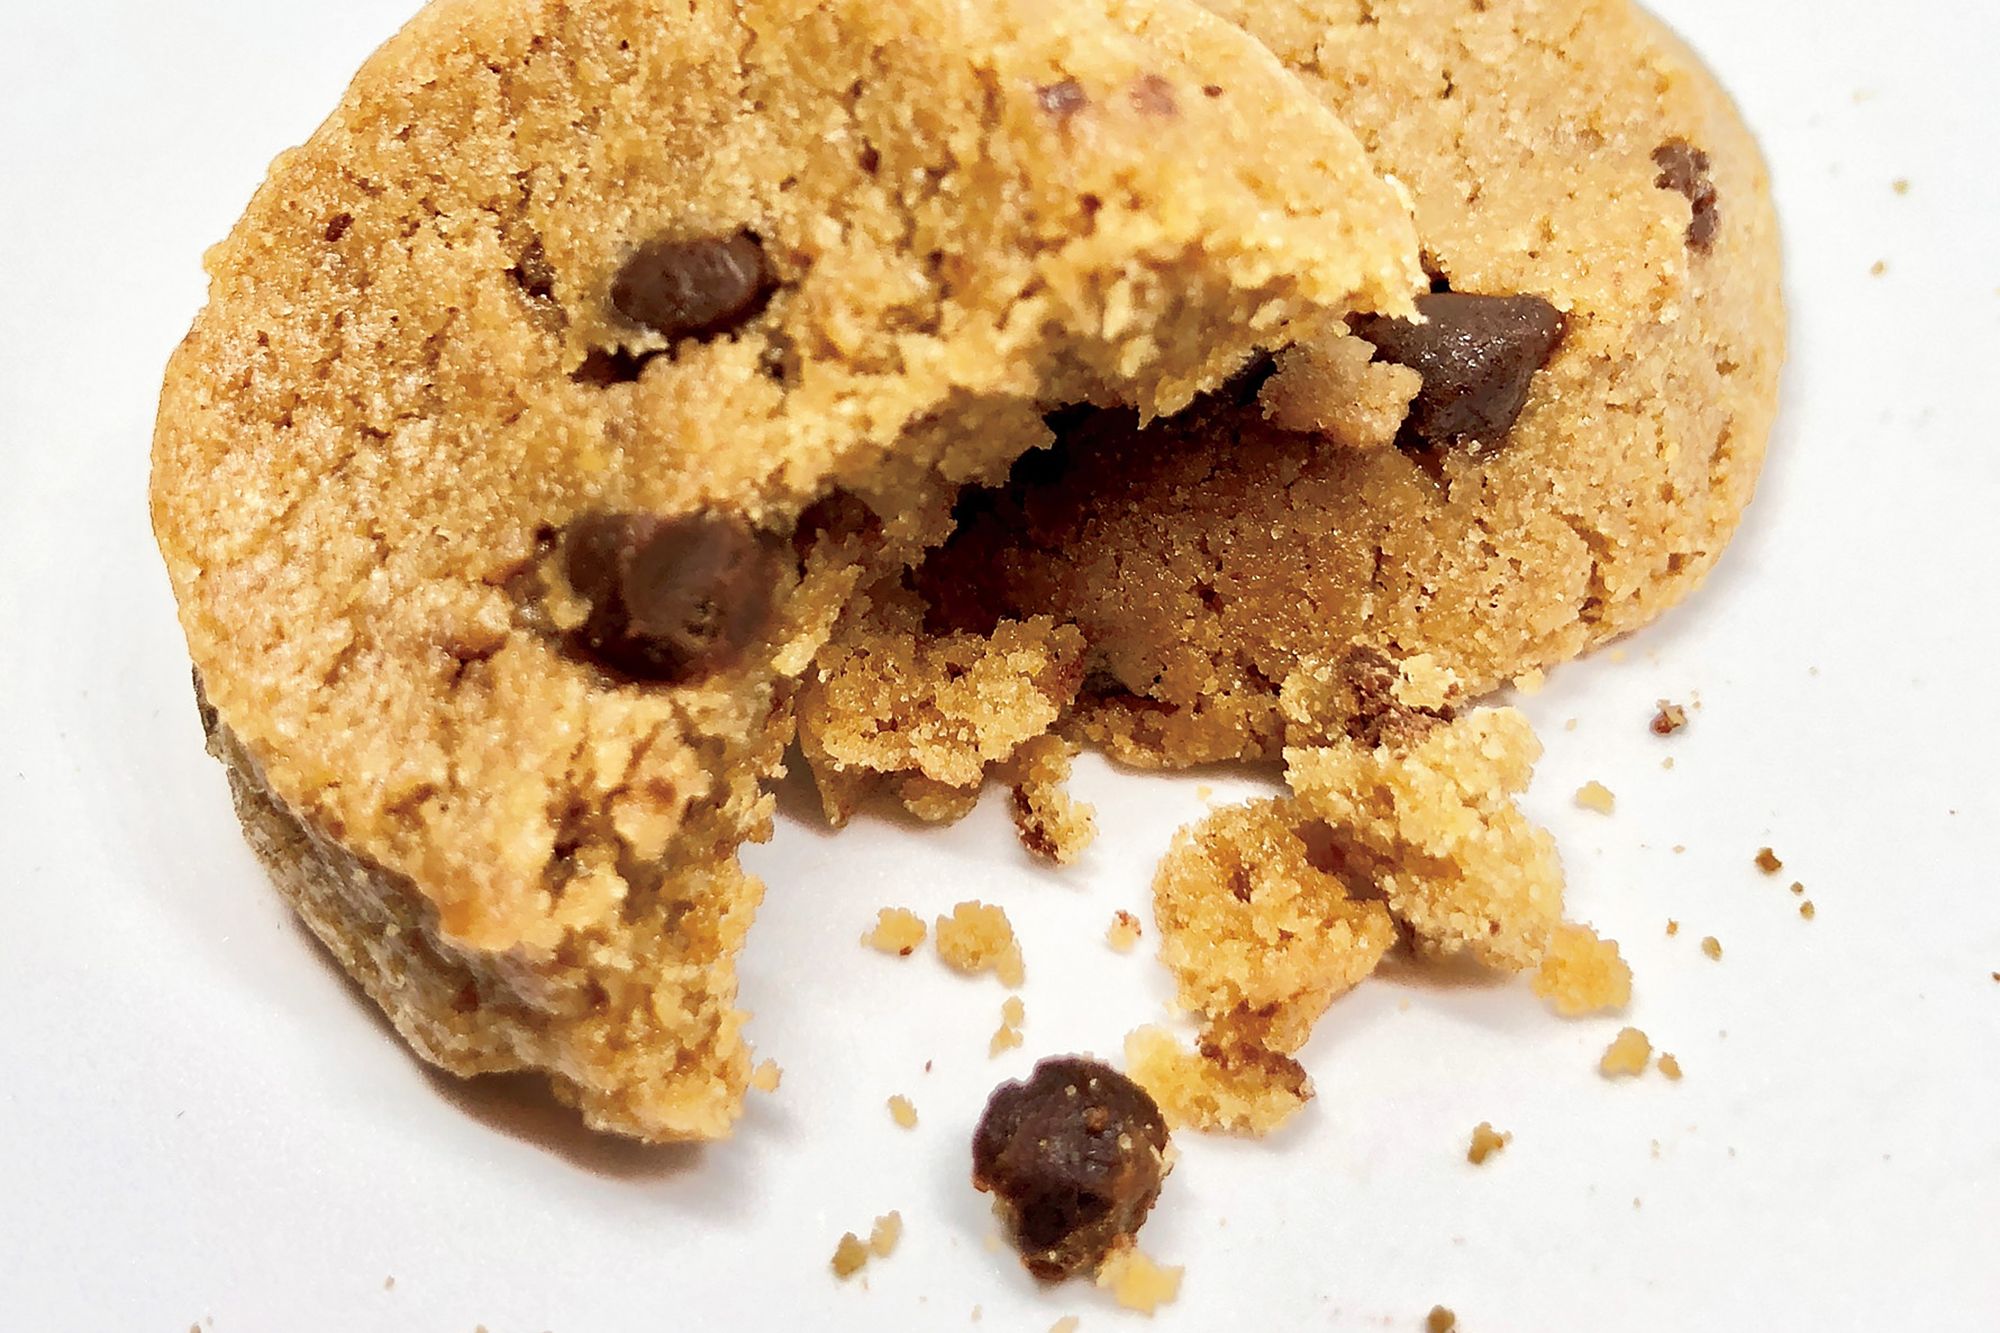 Two Siblings Turn Their Mom's Cookie Recipe Into Cannabis Gold